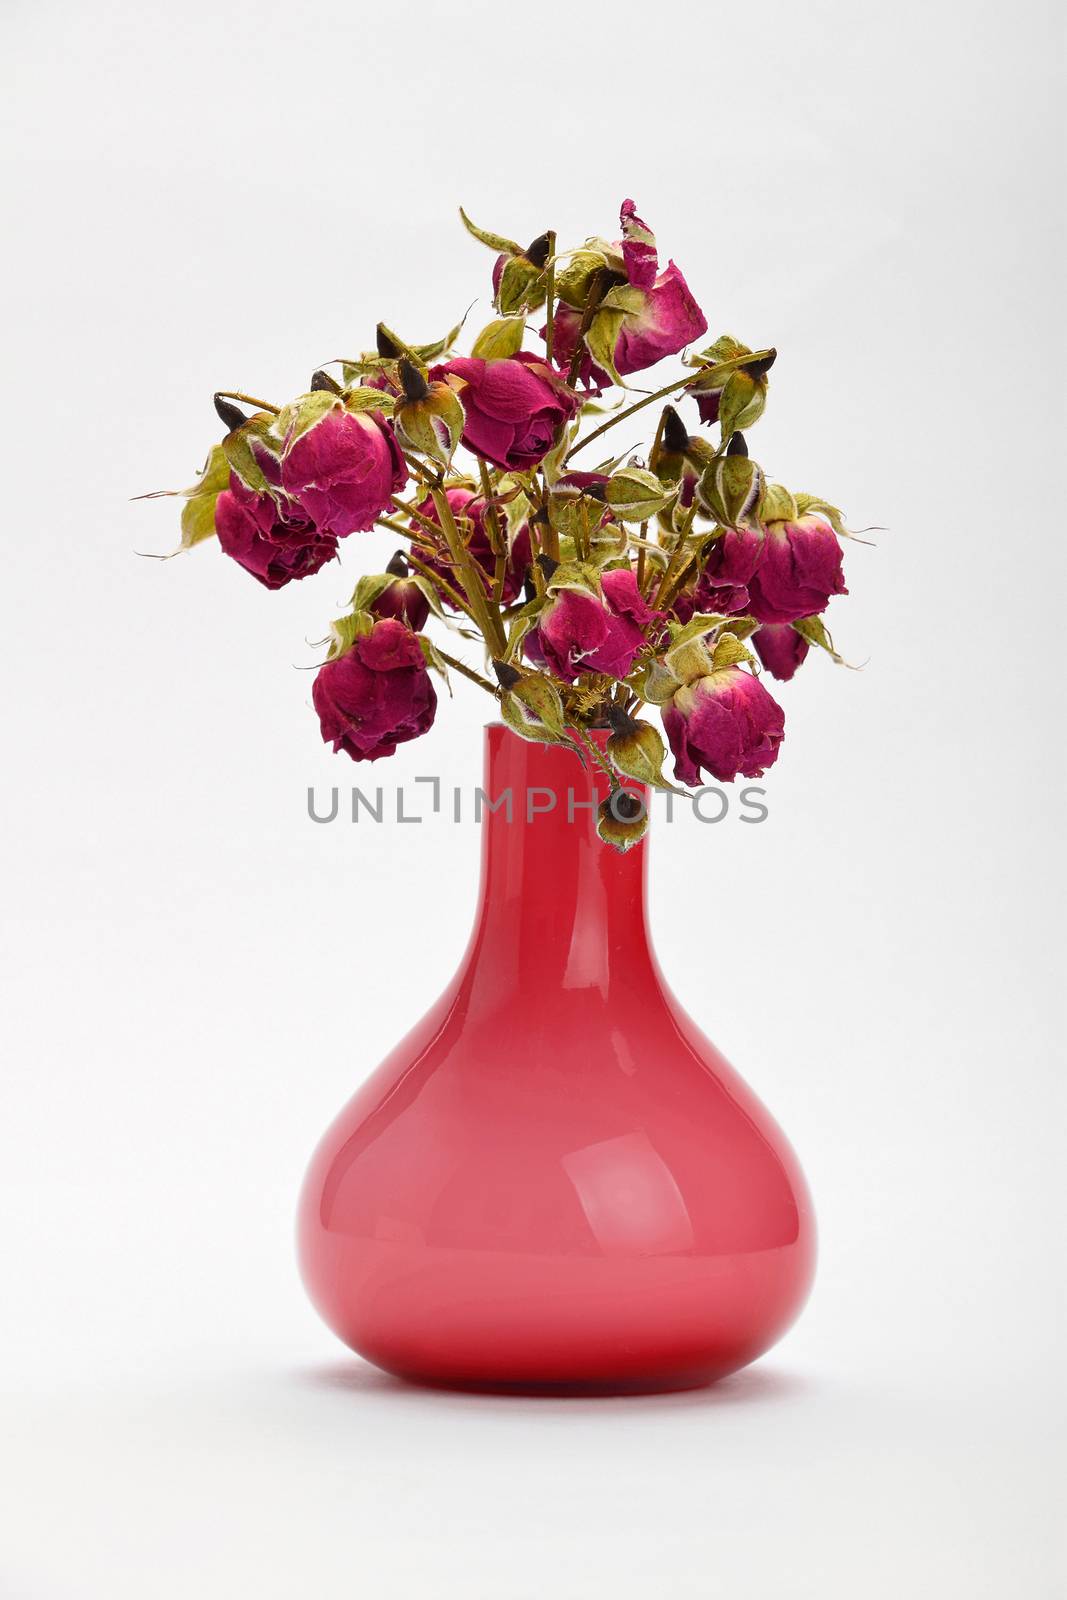 Dried-up red purple roses in pink vase isolated on white background with shade